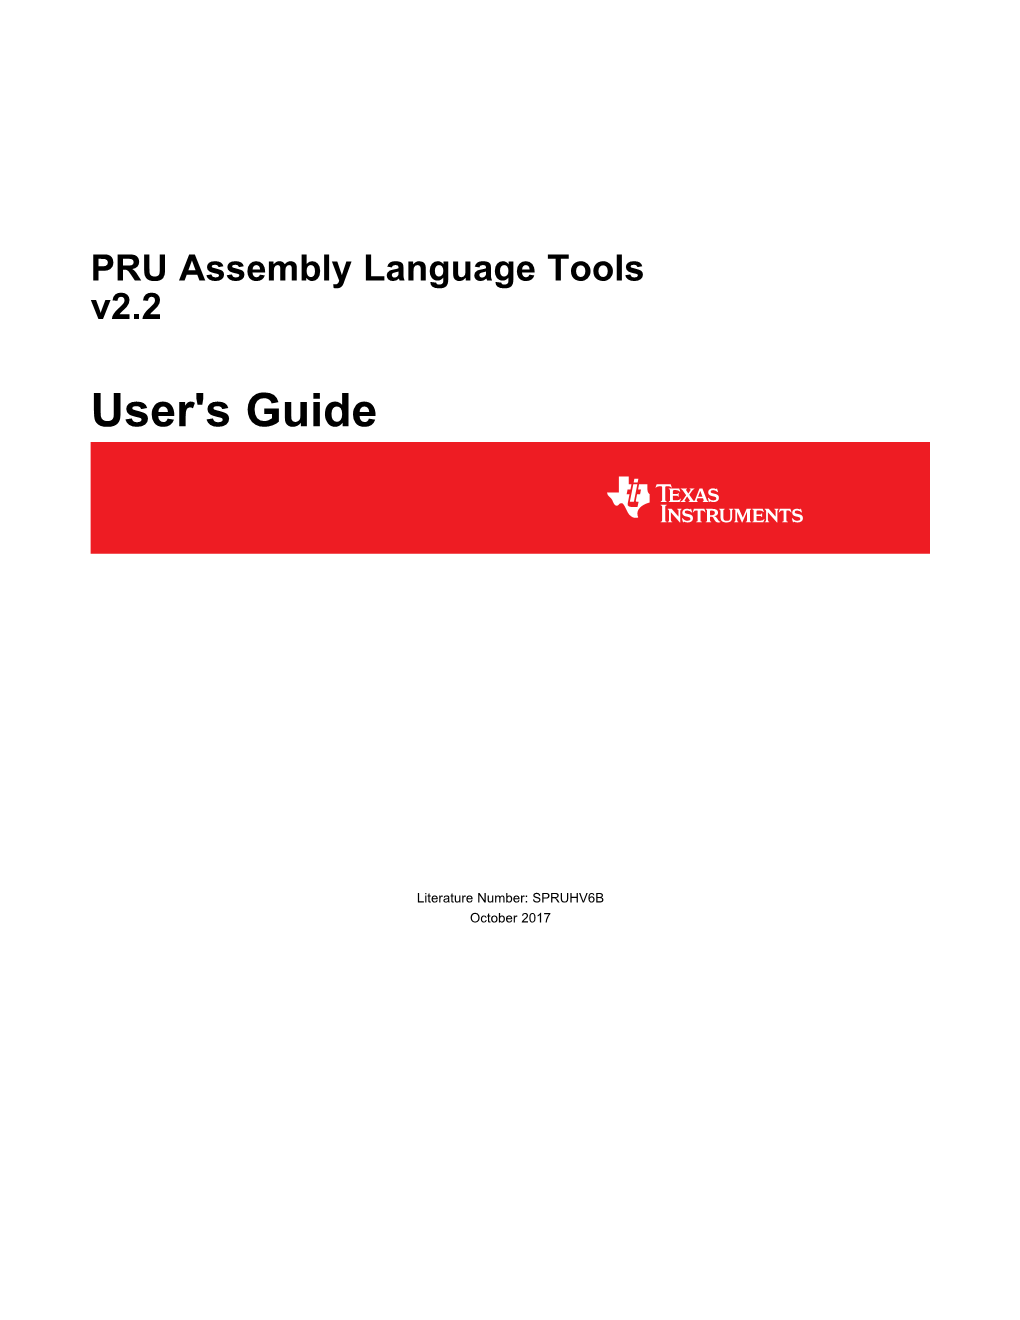 PRU Assembly Language Tools User Guide